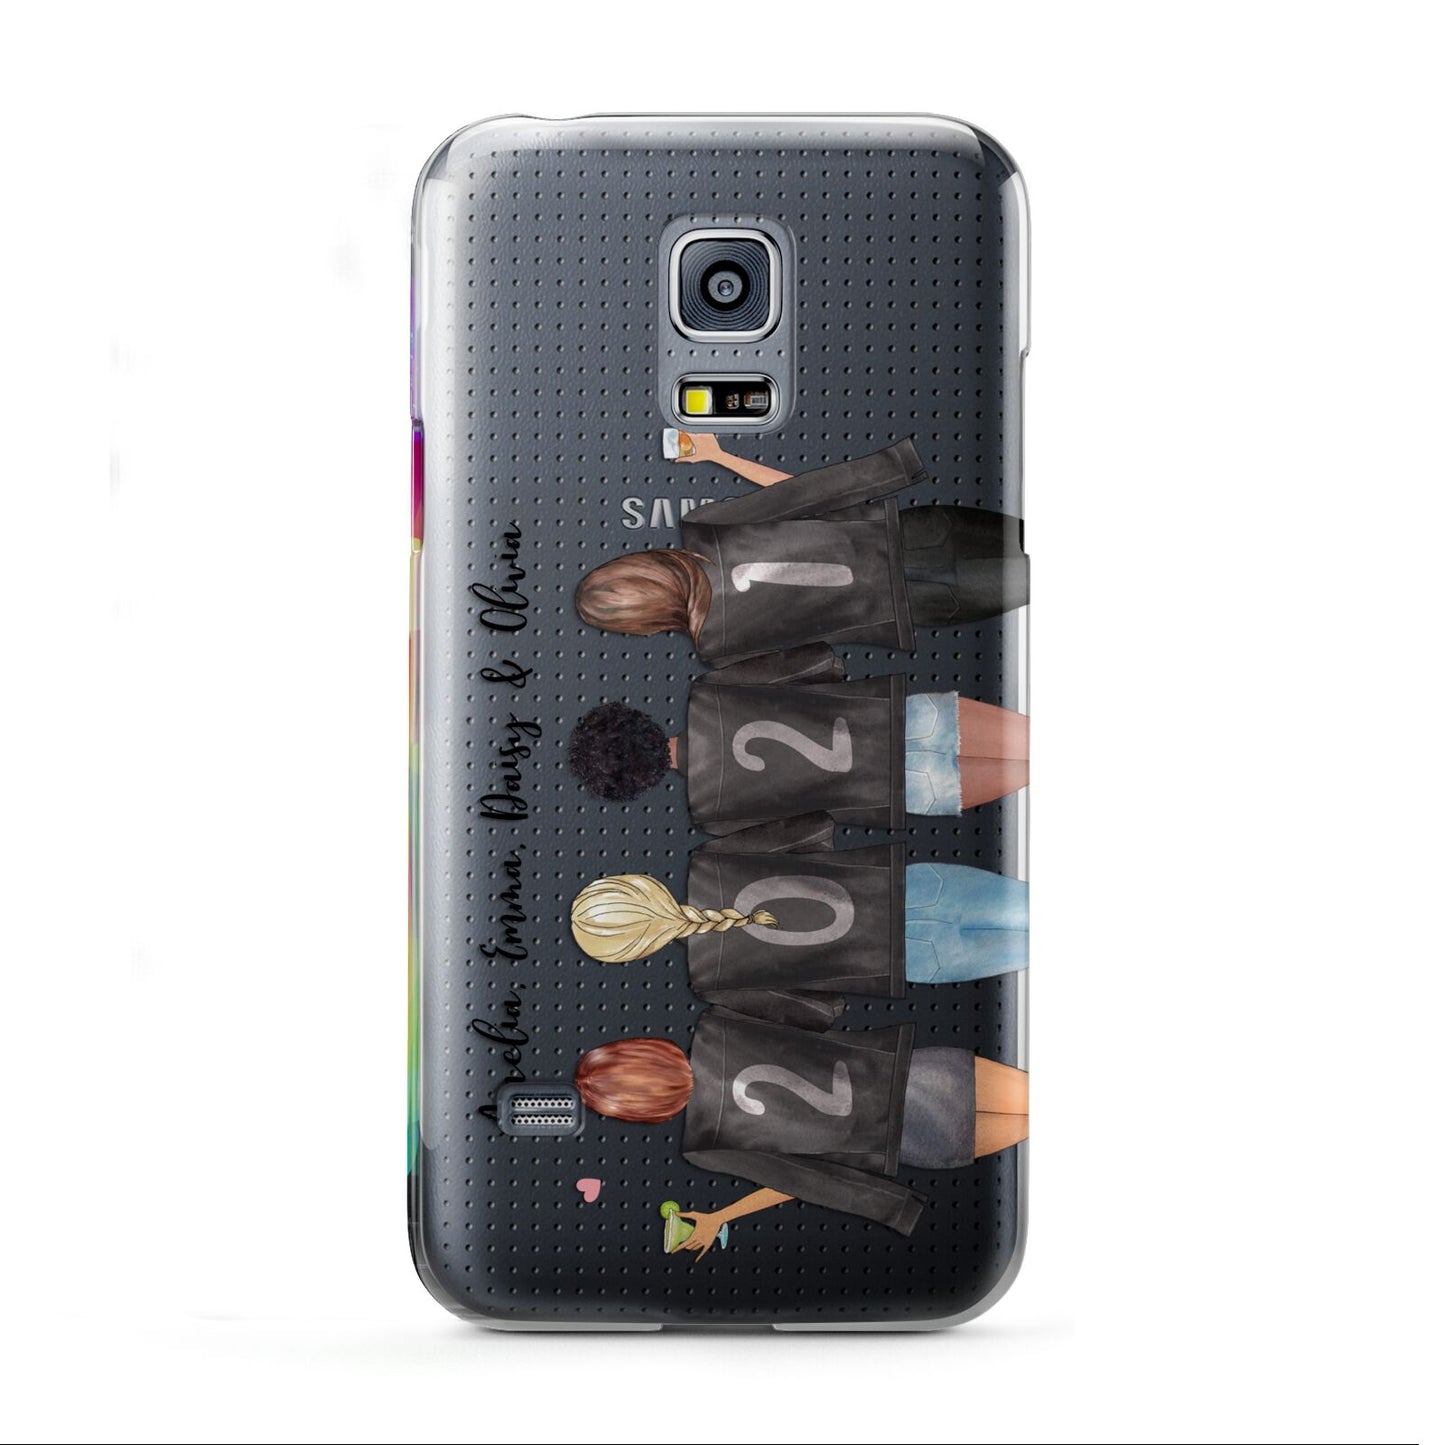 4 Best Friends with Names Samsung Galaxy S5 Mini Case